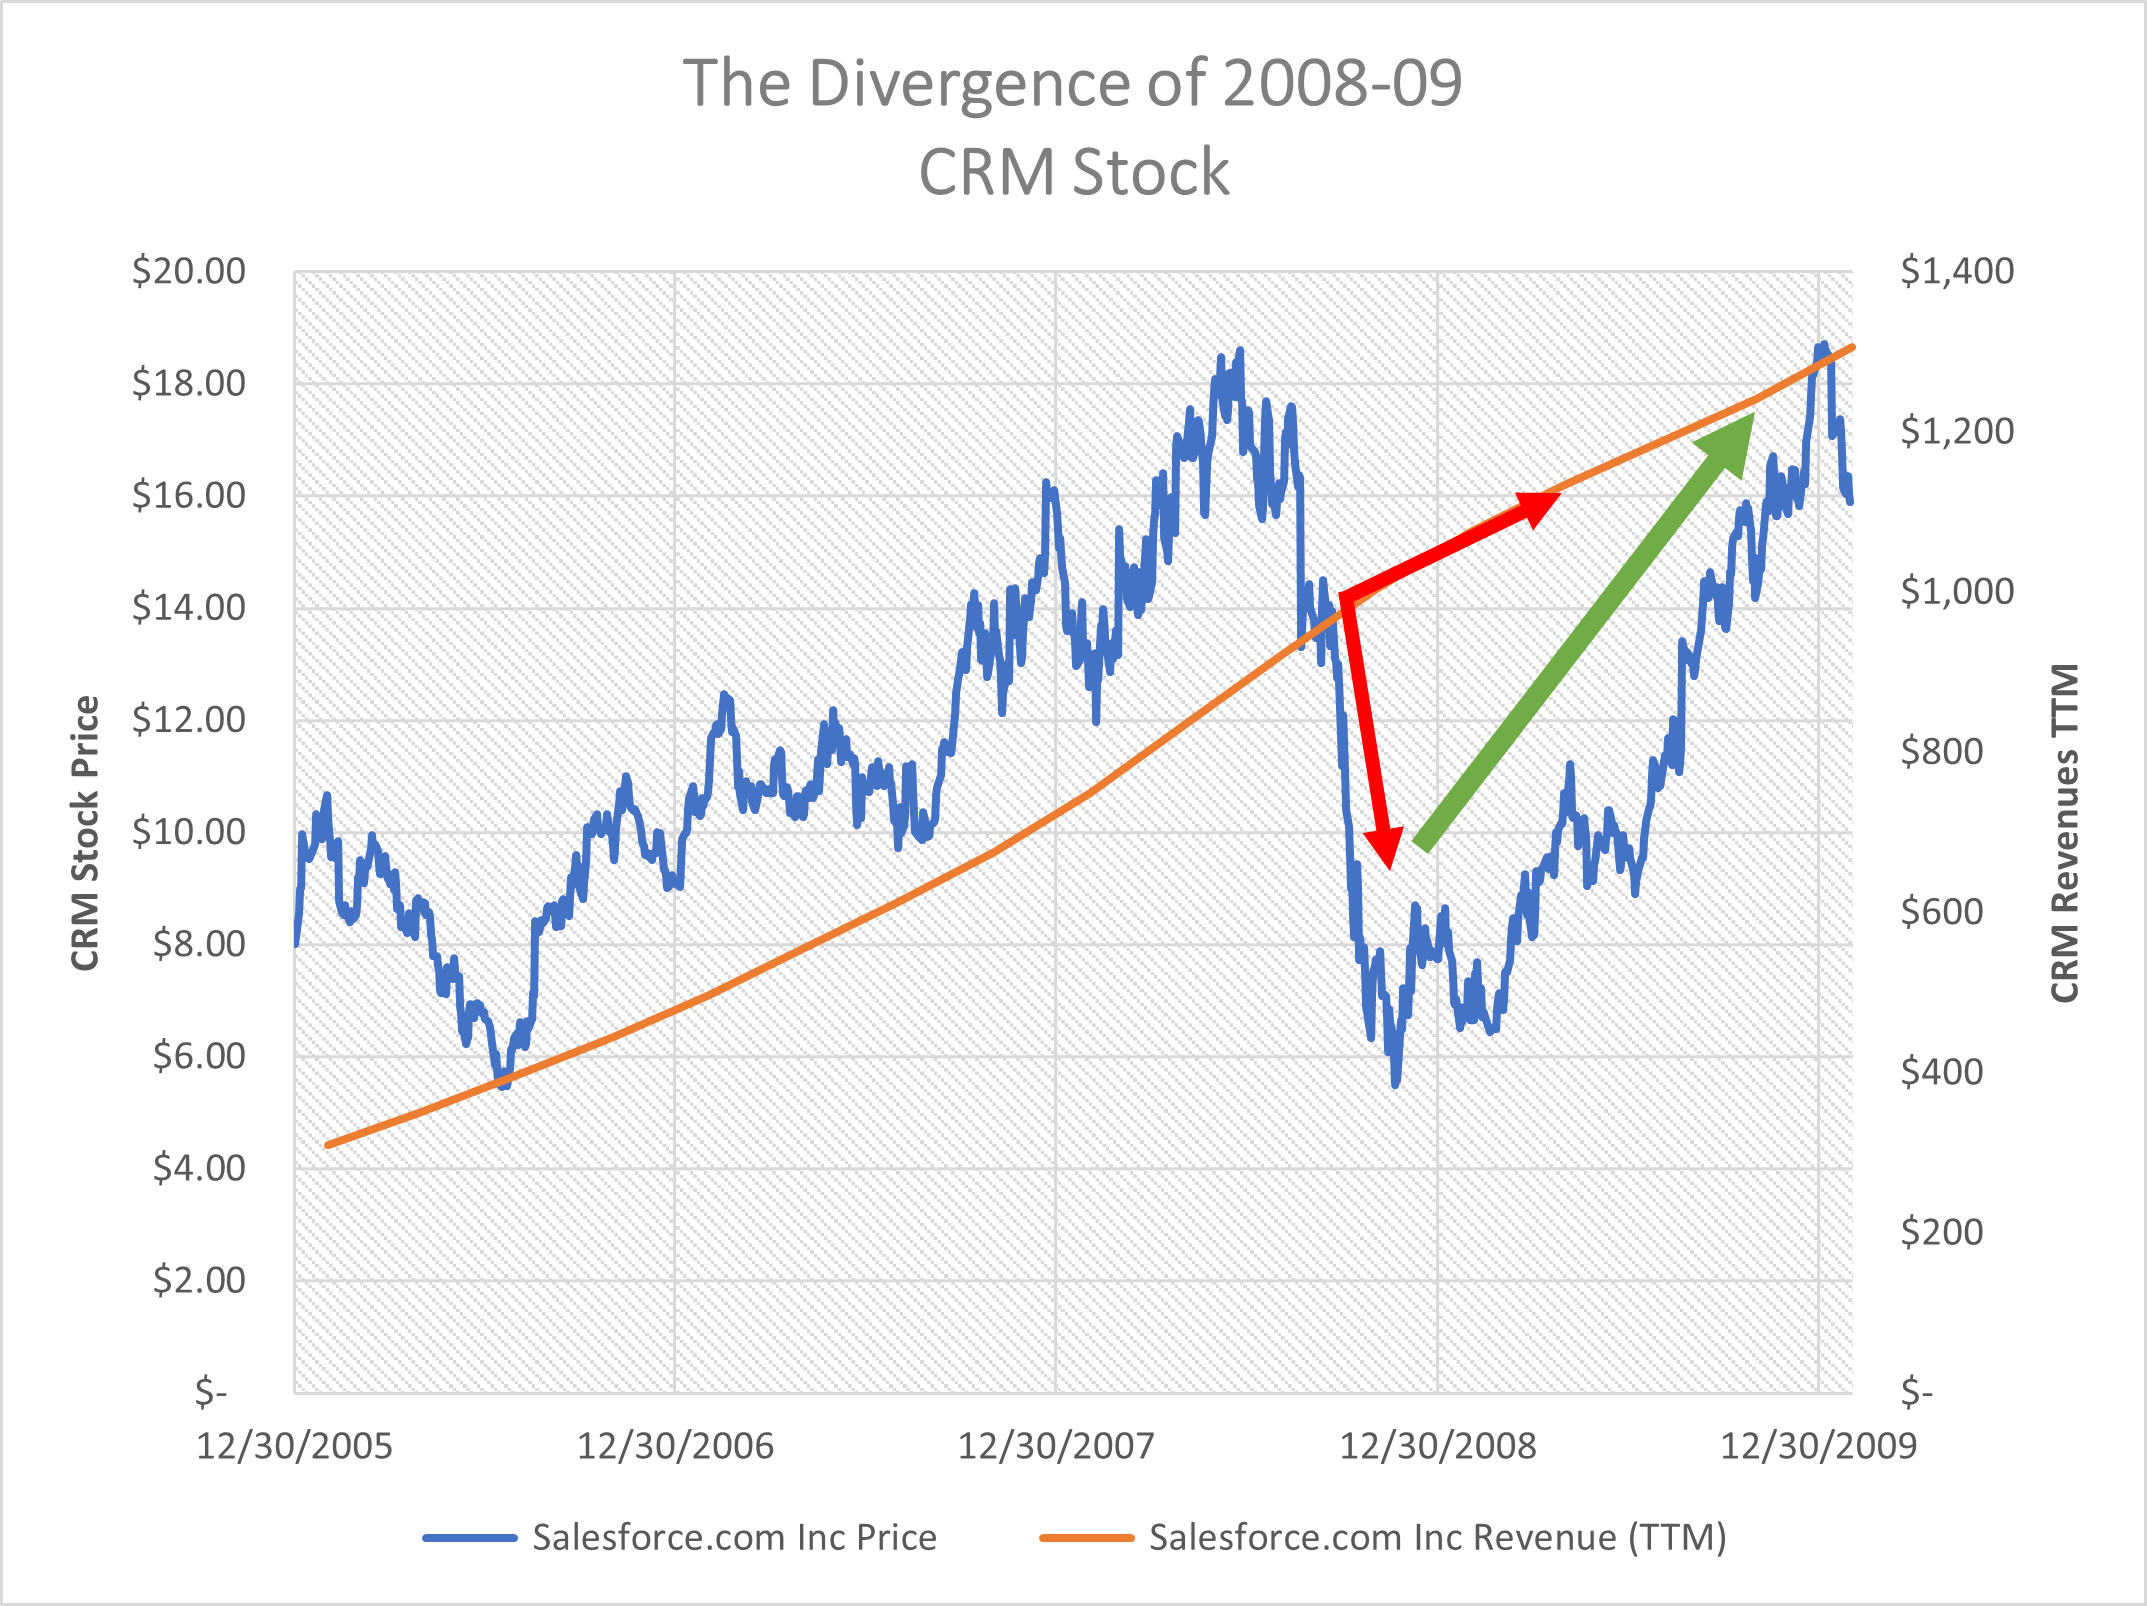 The divergence of 2008-2009